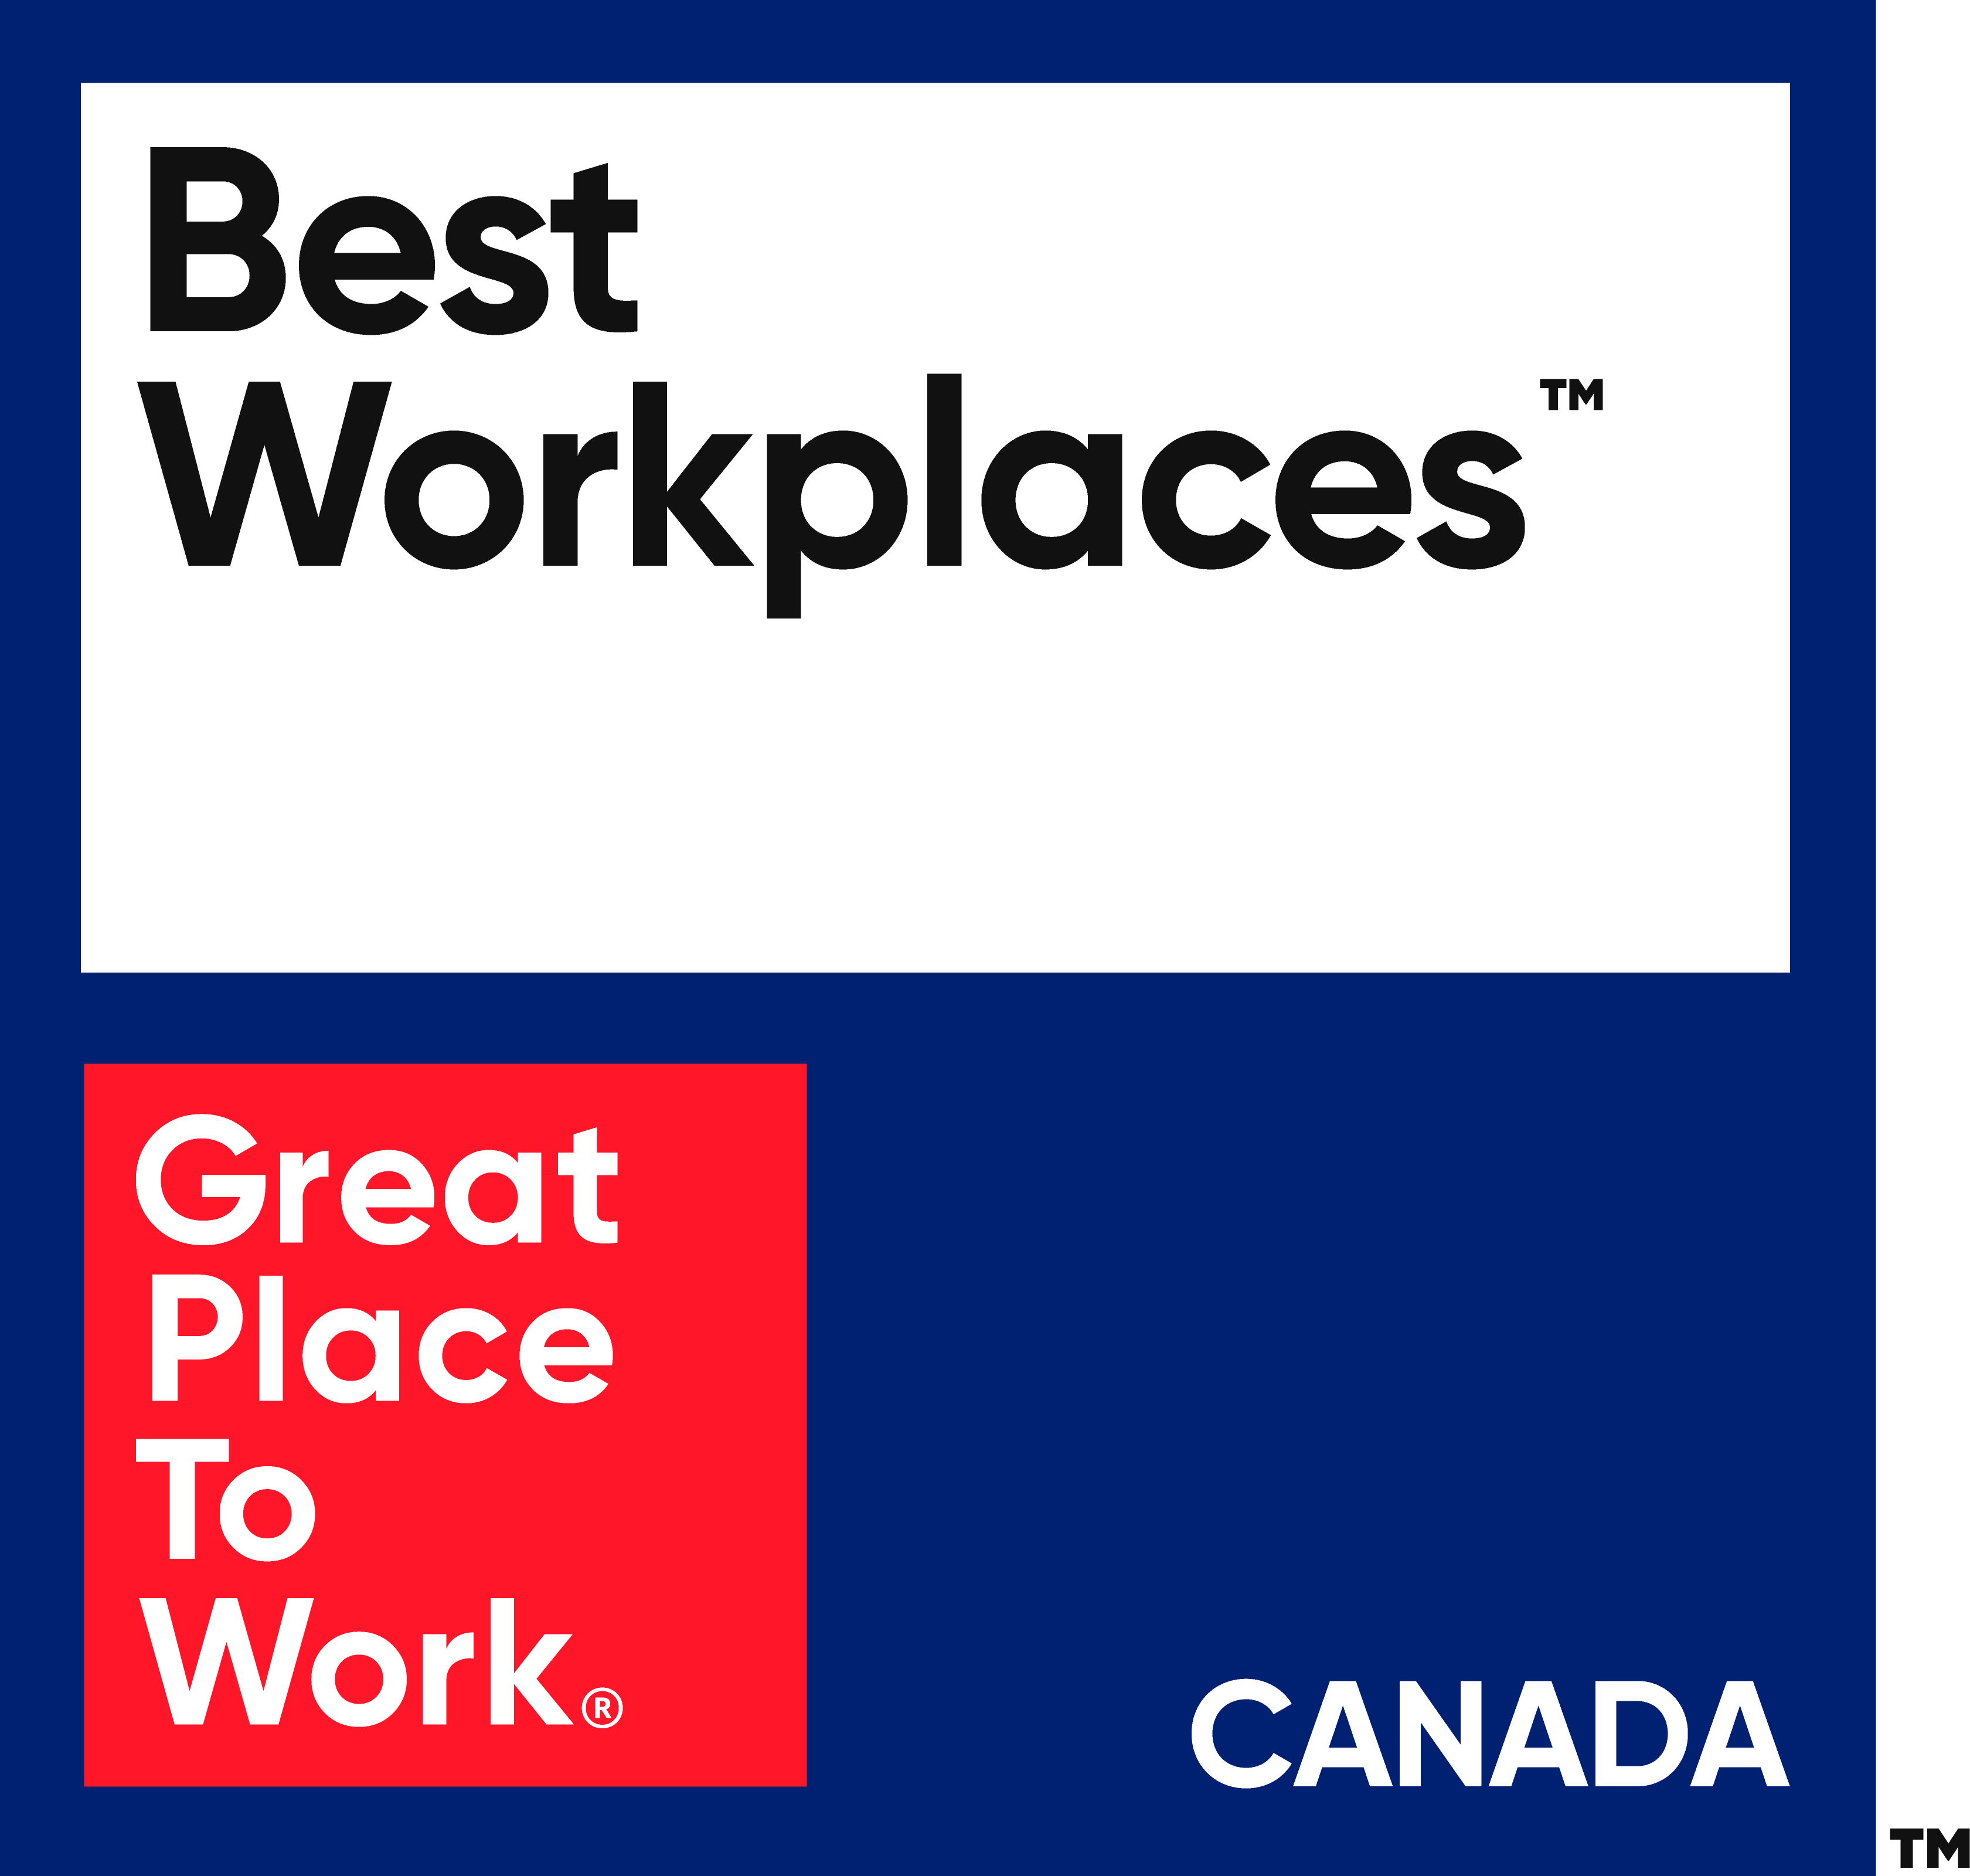 Best Workplaces in Canada